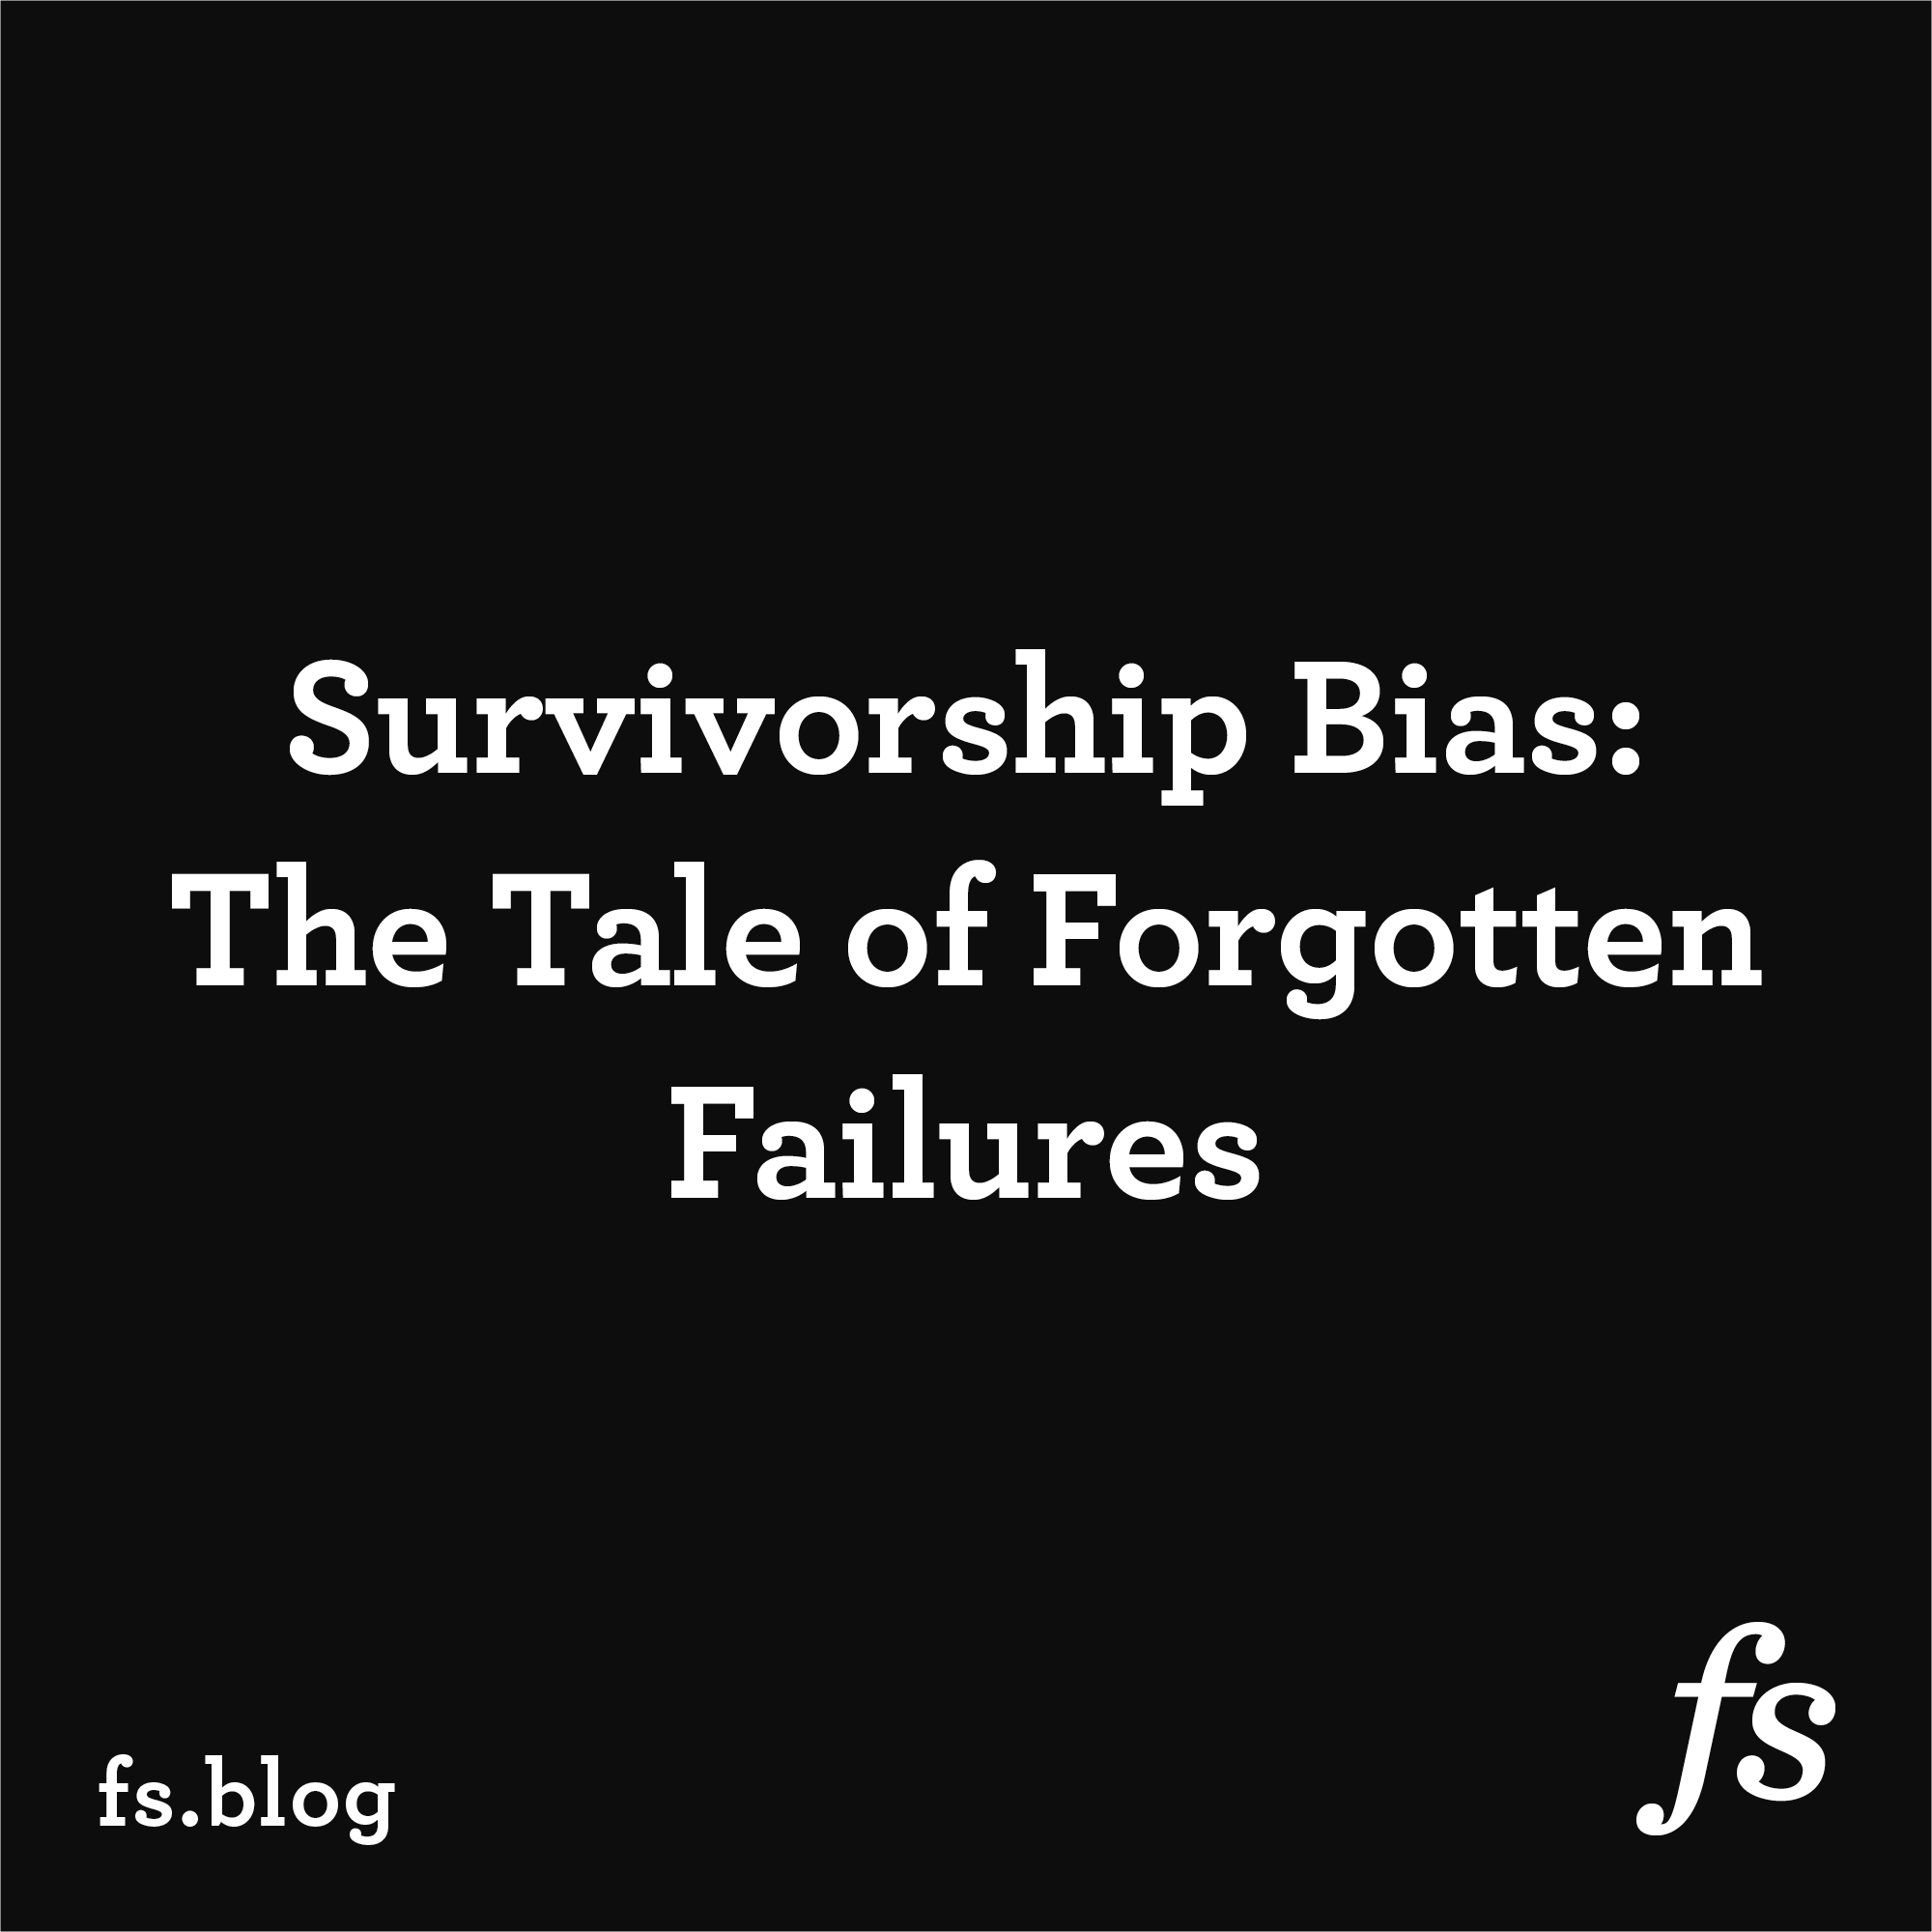 What Every Founder Needs to Know About Survivorship Bias